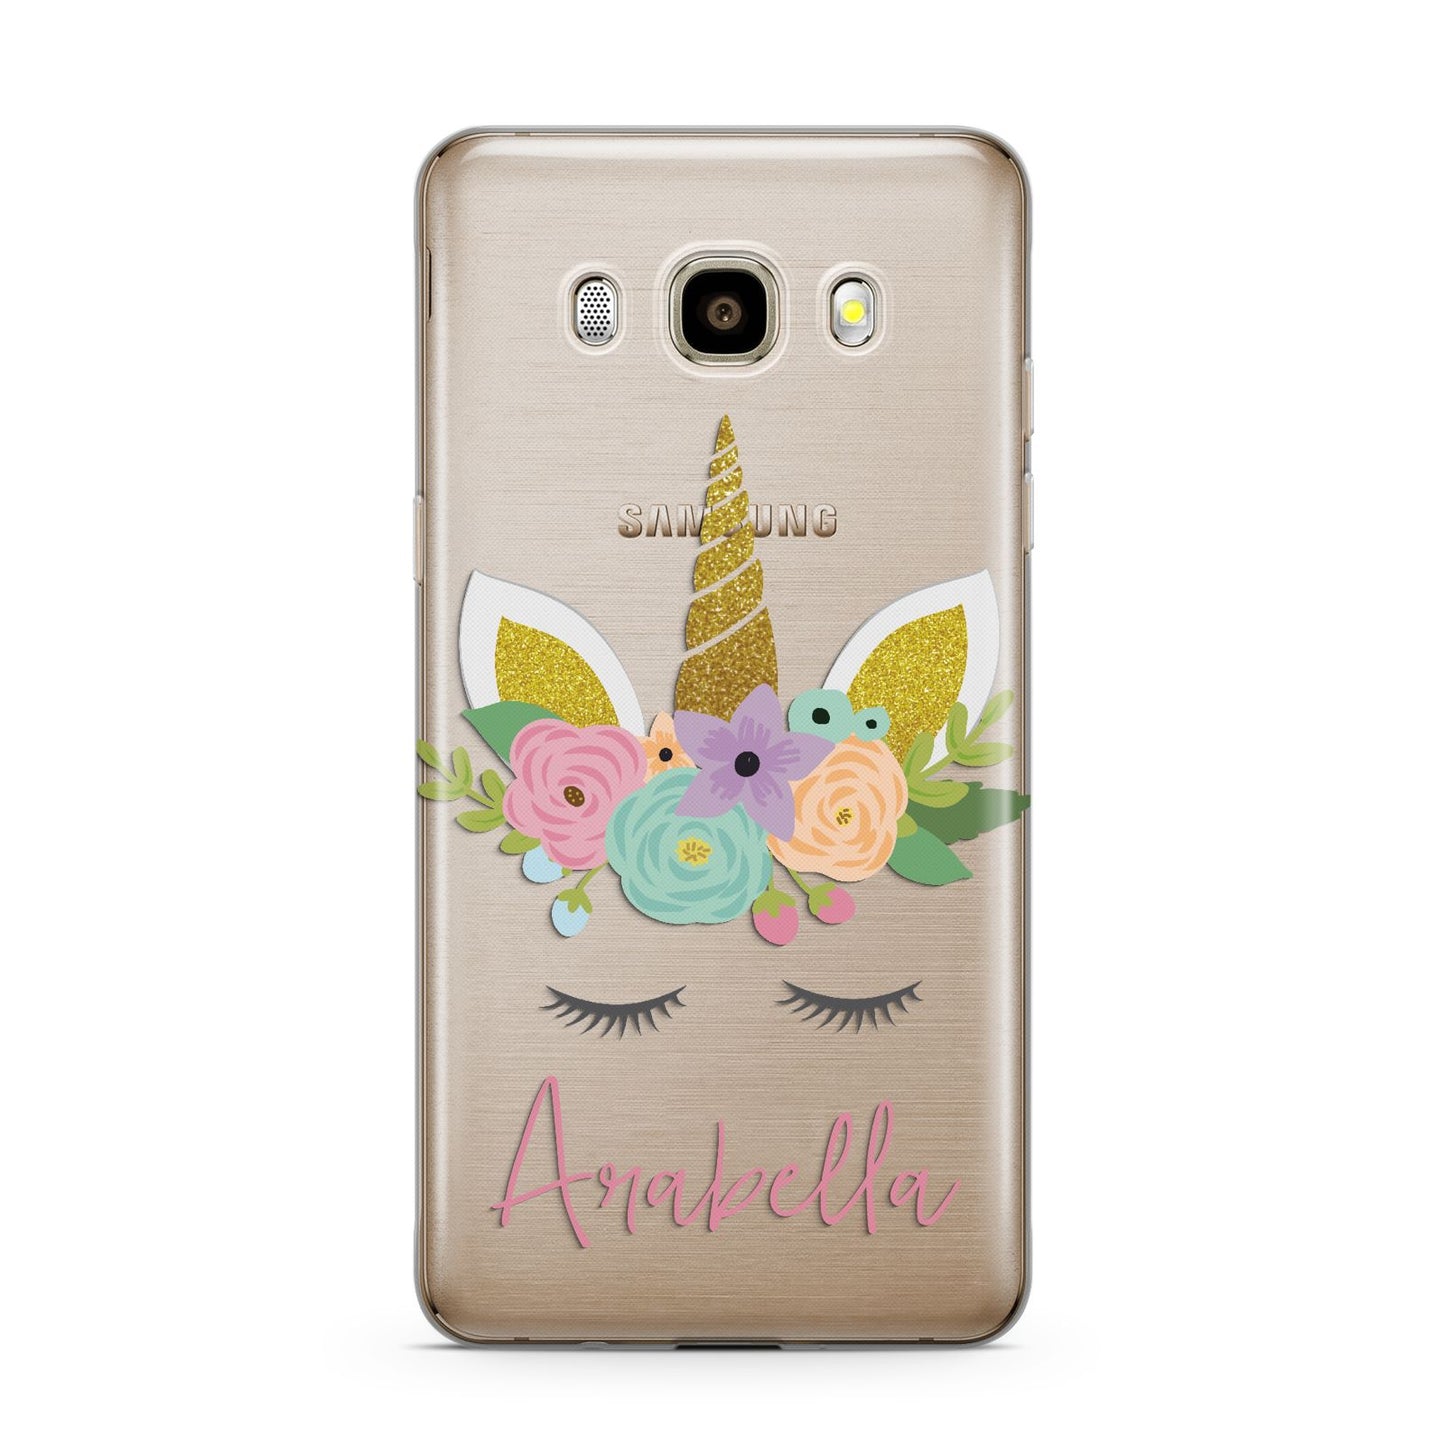 Personalised Unicorn Face Samsung Galaxy J7 2016 Case on gold phone